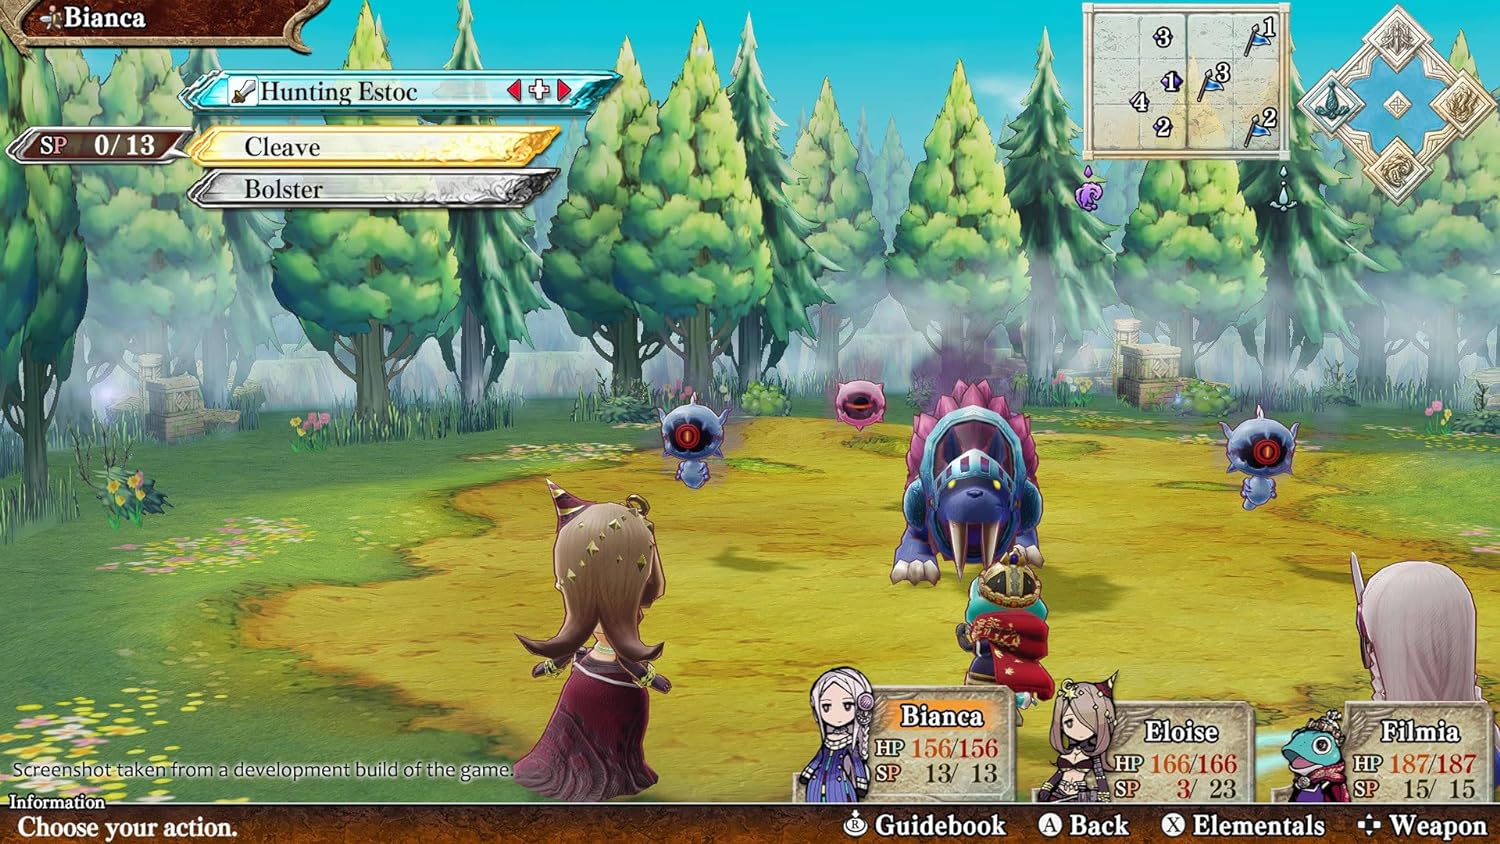 PS5 The Legend of Legacy HD Remastered